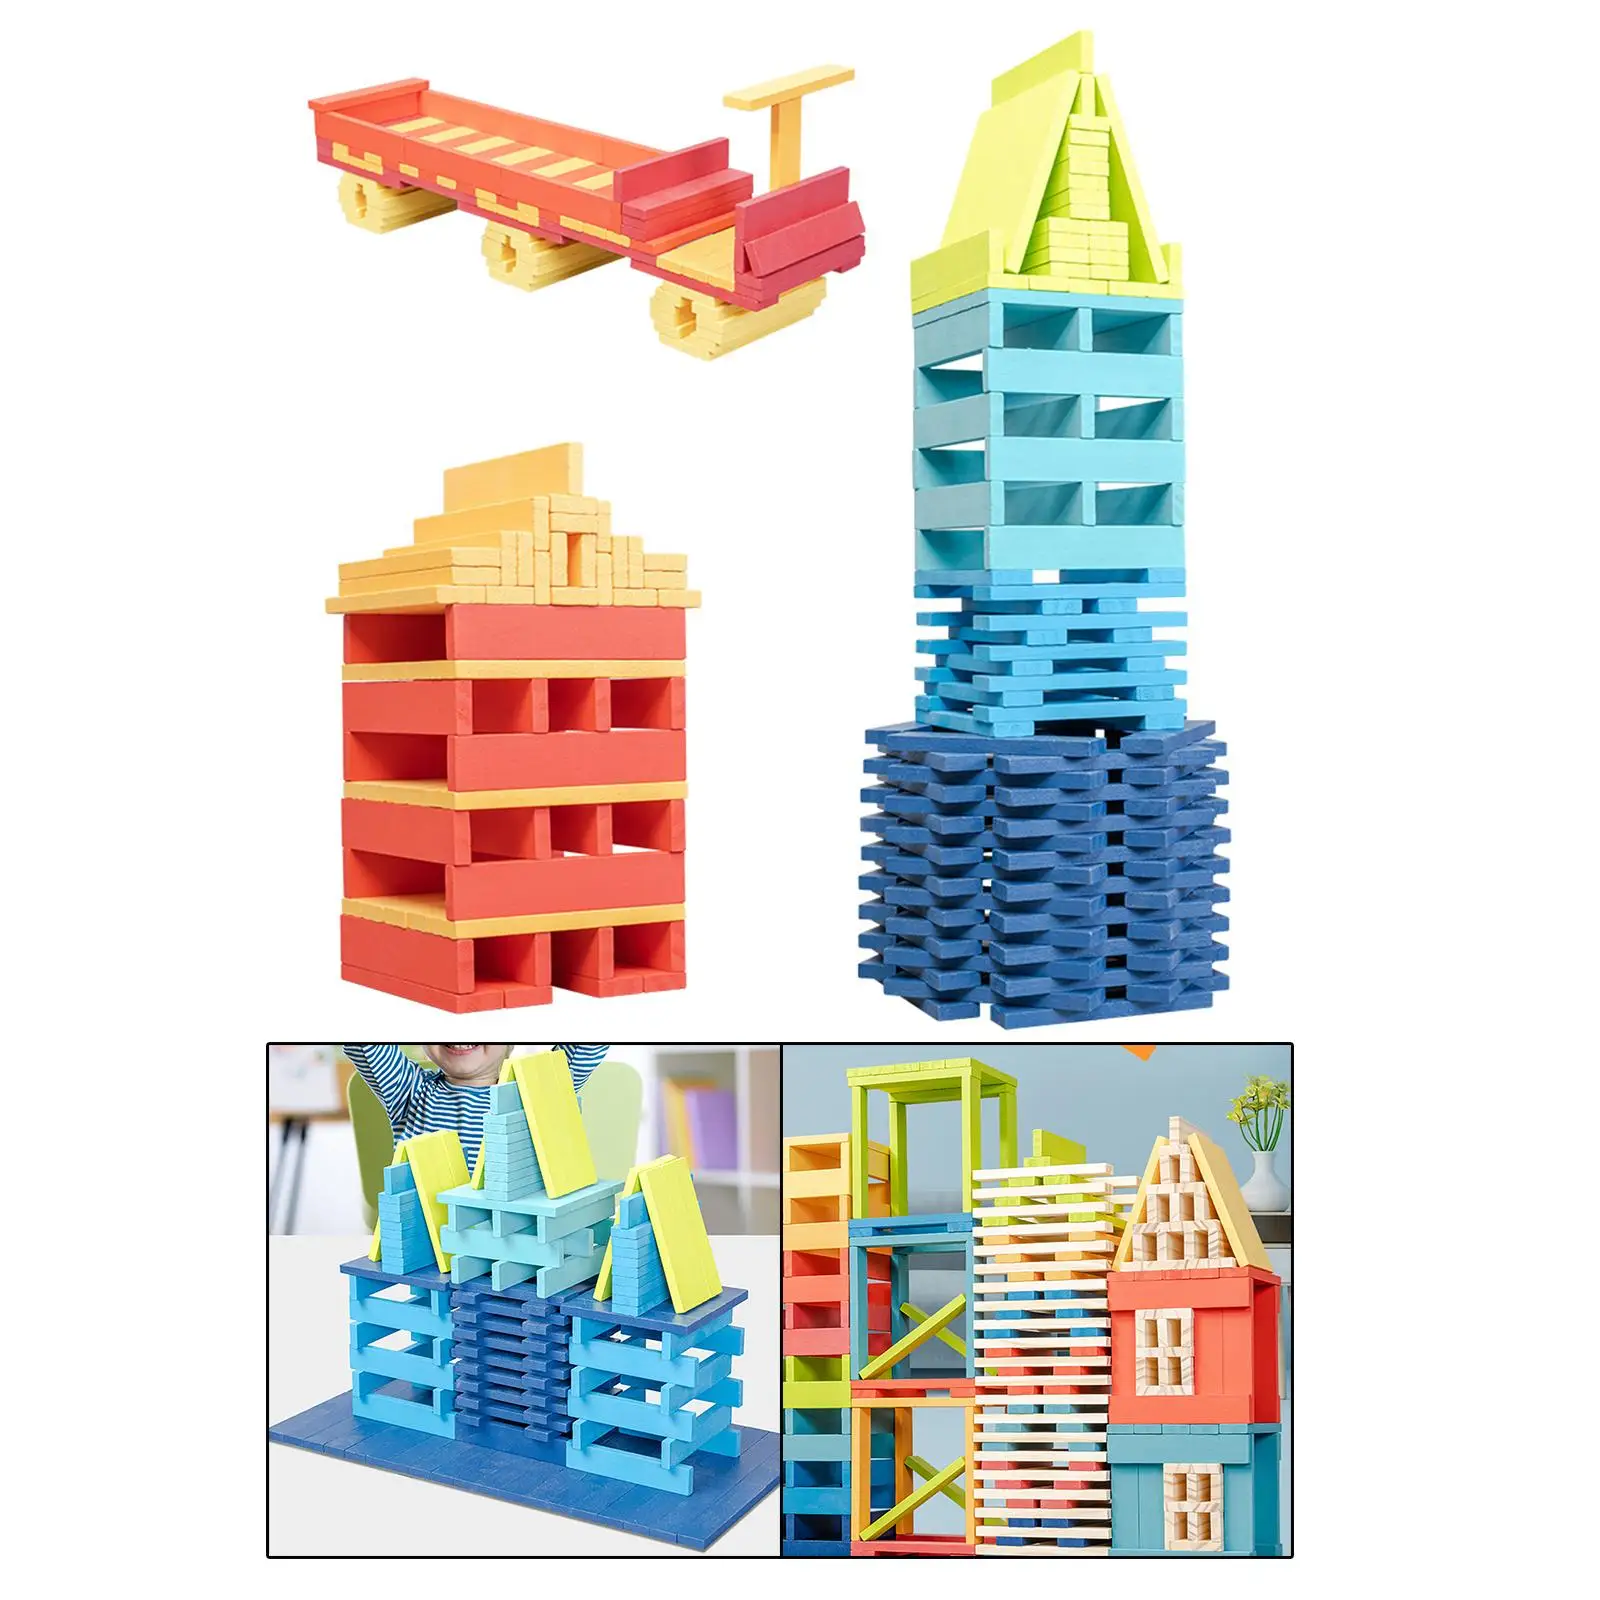 100 Pieces Wooden Building Blocks Toys Early Educational Toys Preschool Learning